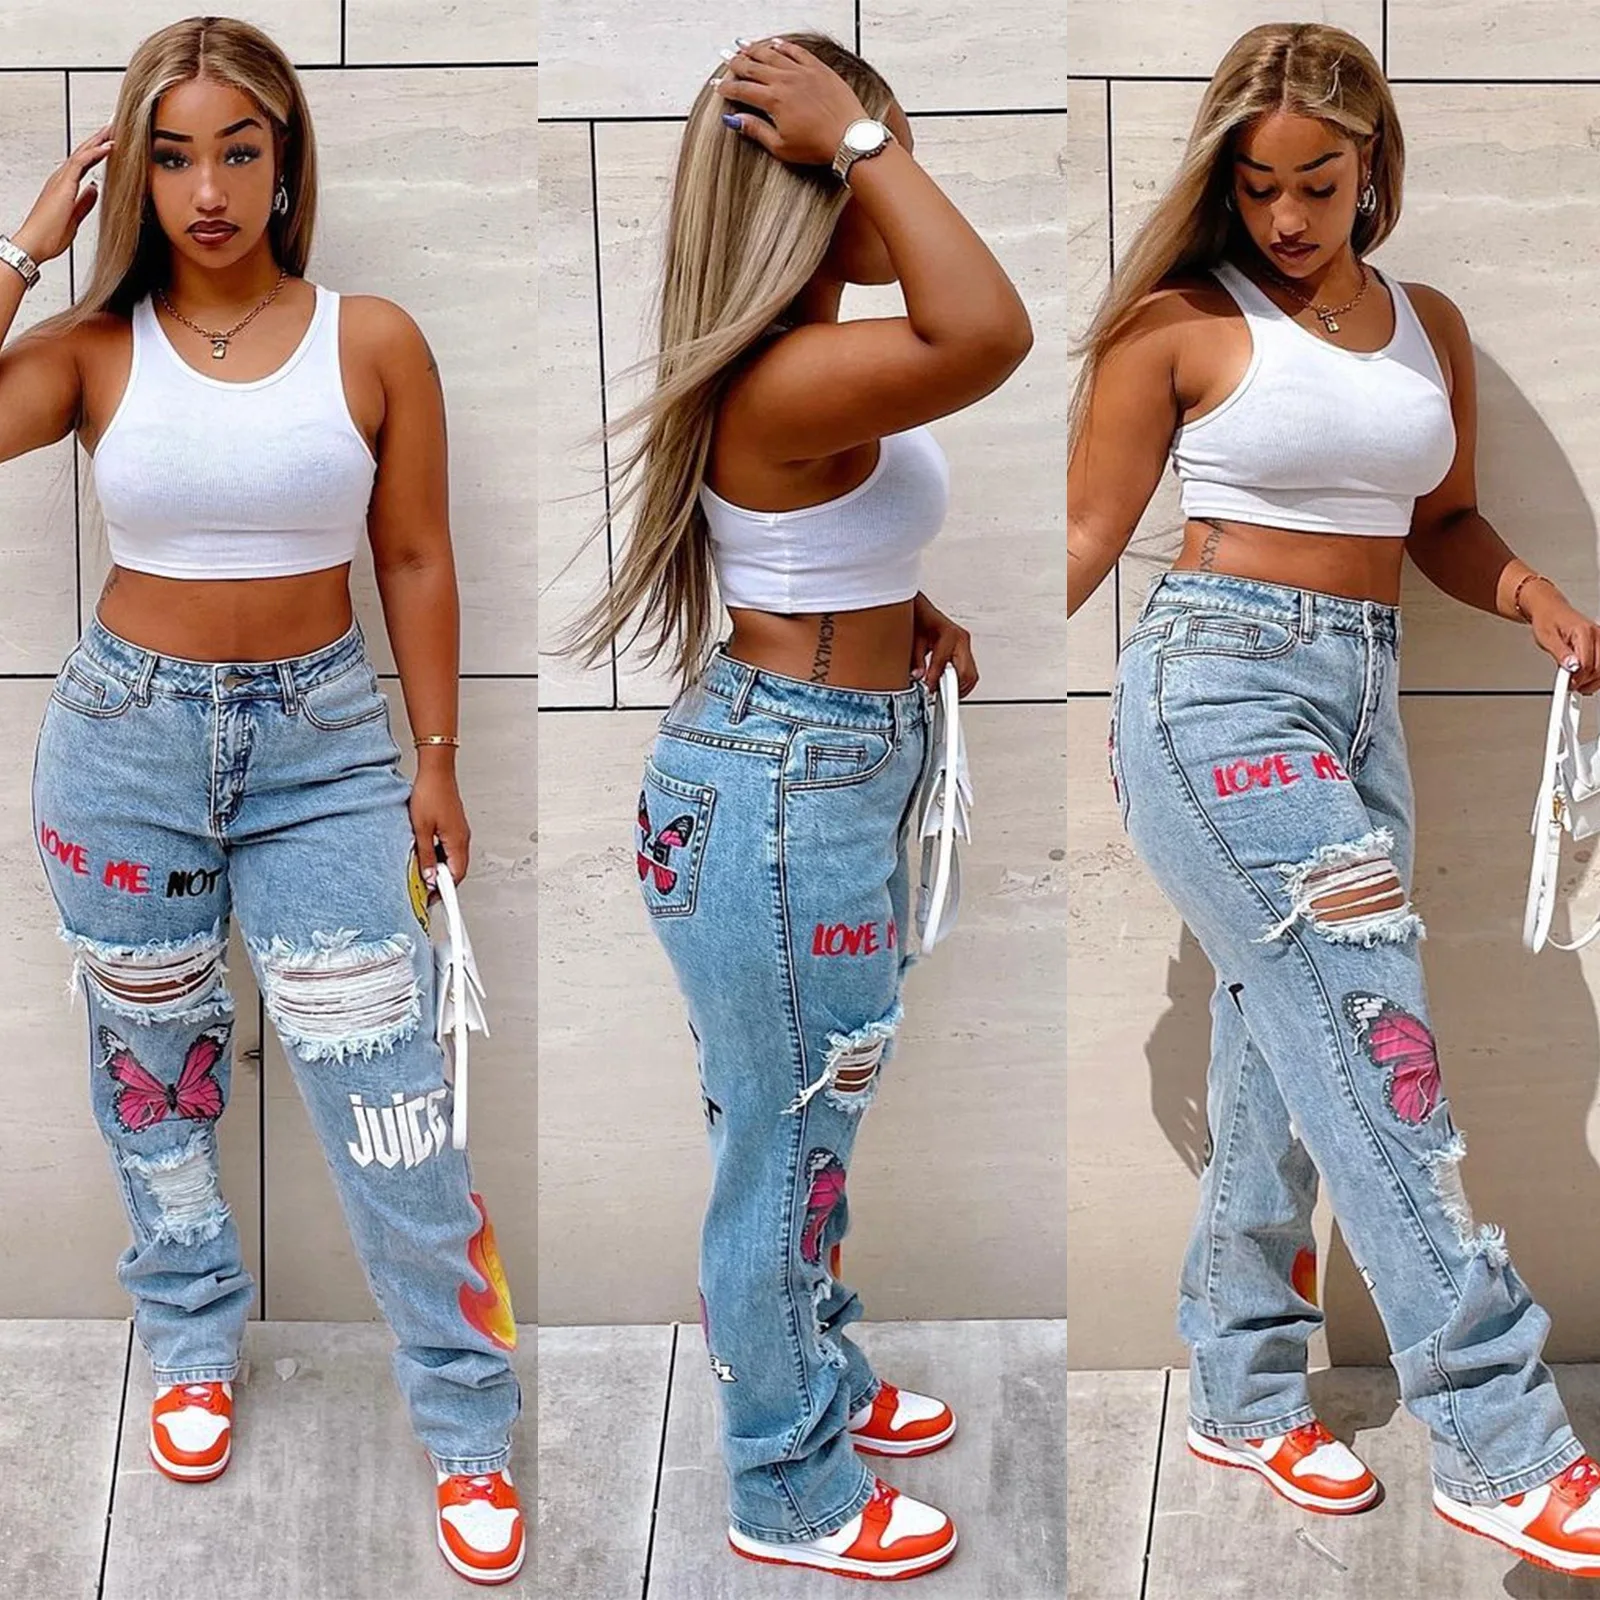 Butterfly Flame Print Denim Cut Out Distressed Jeans For Women High Street Hip Hop Baggy Hole Pants Sexy Y2K Clubwear Trousers